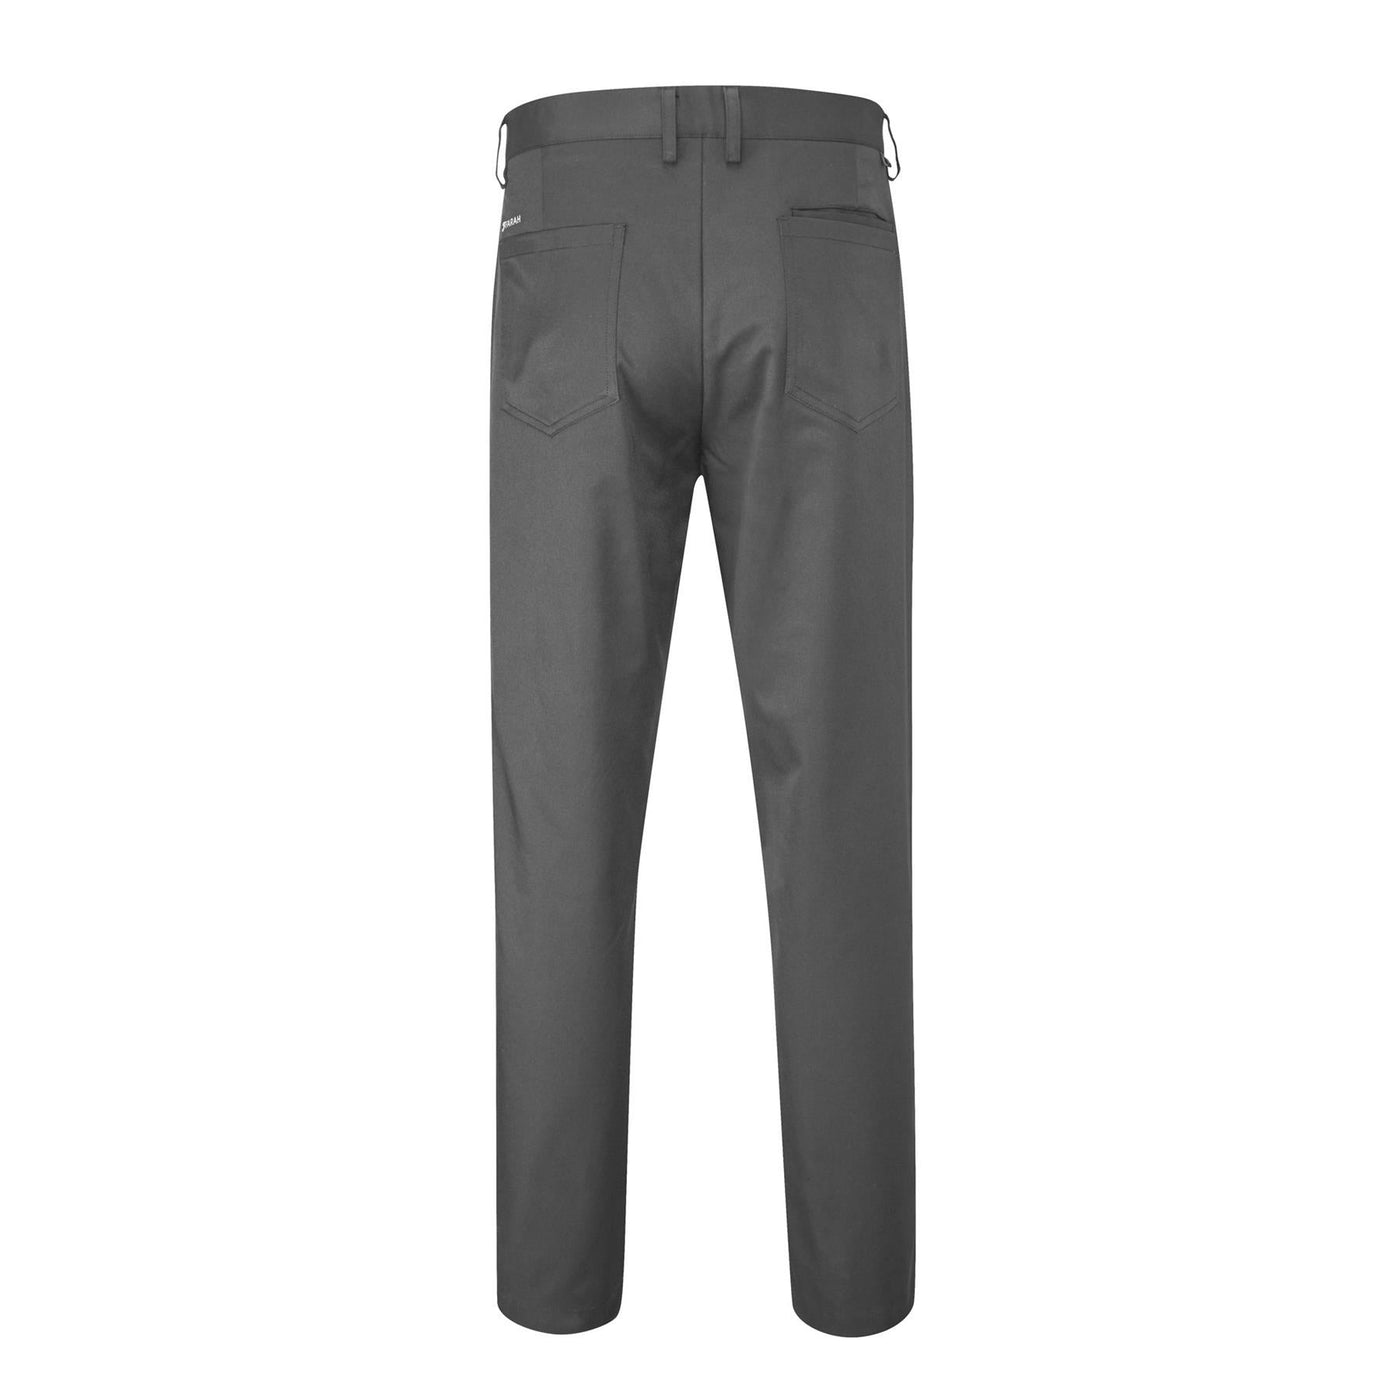 Judson Trousers.